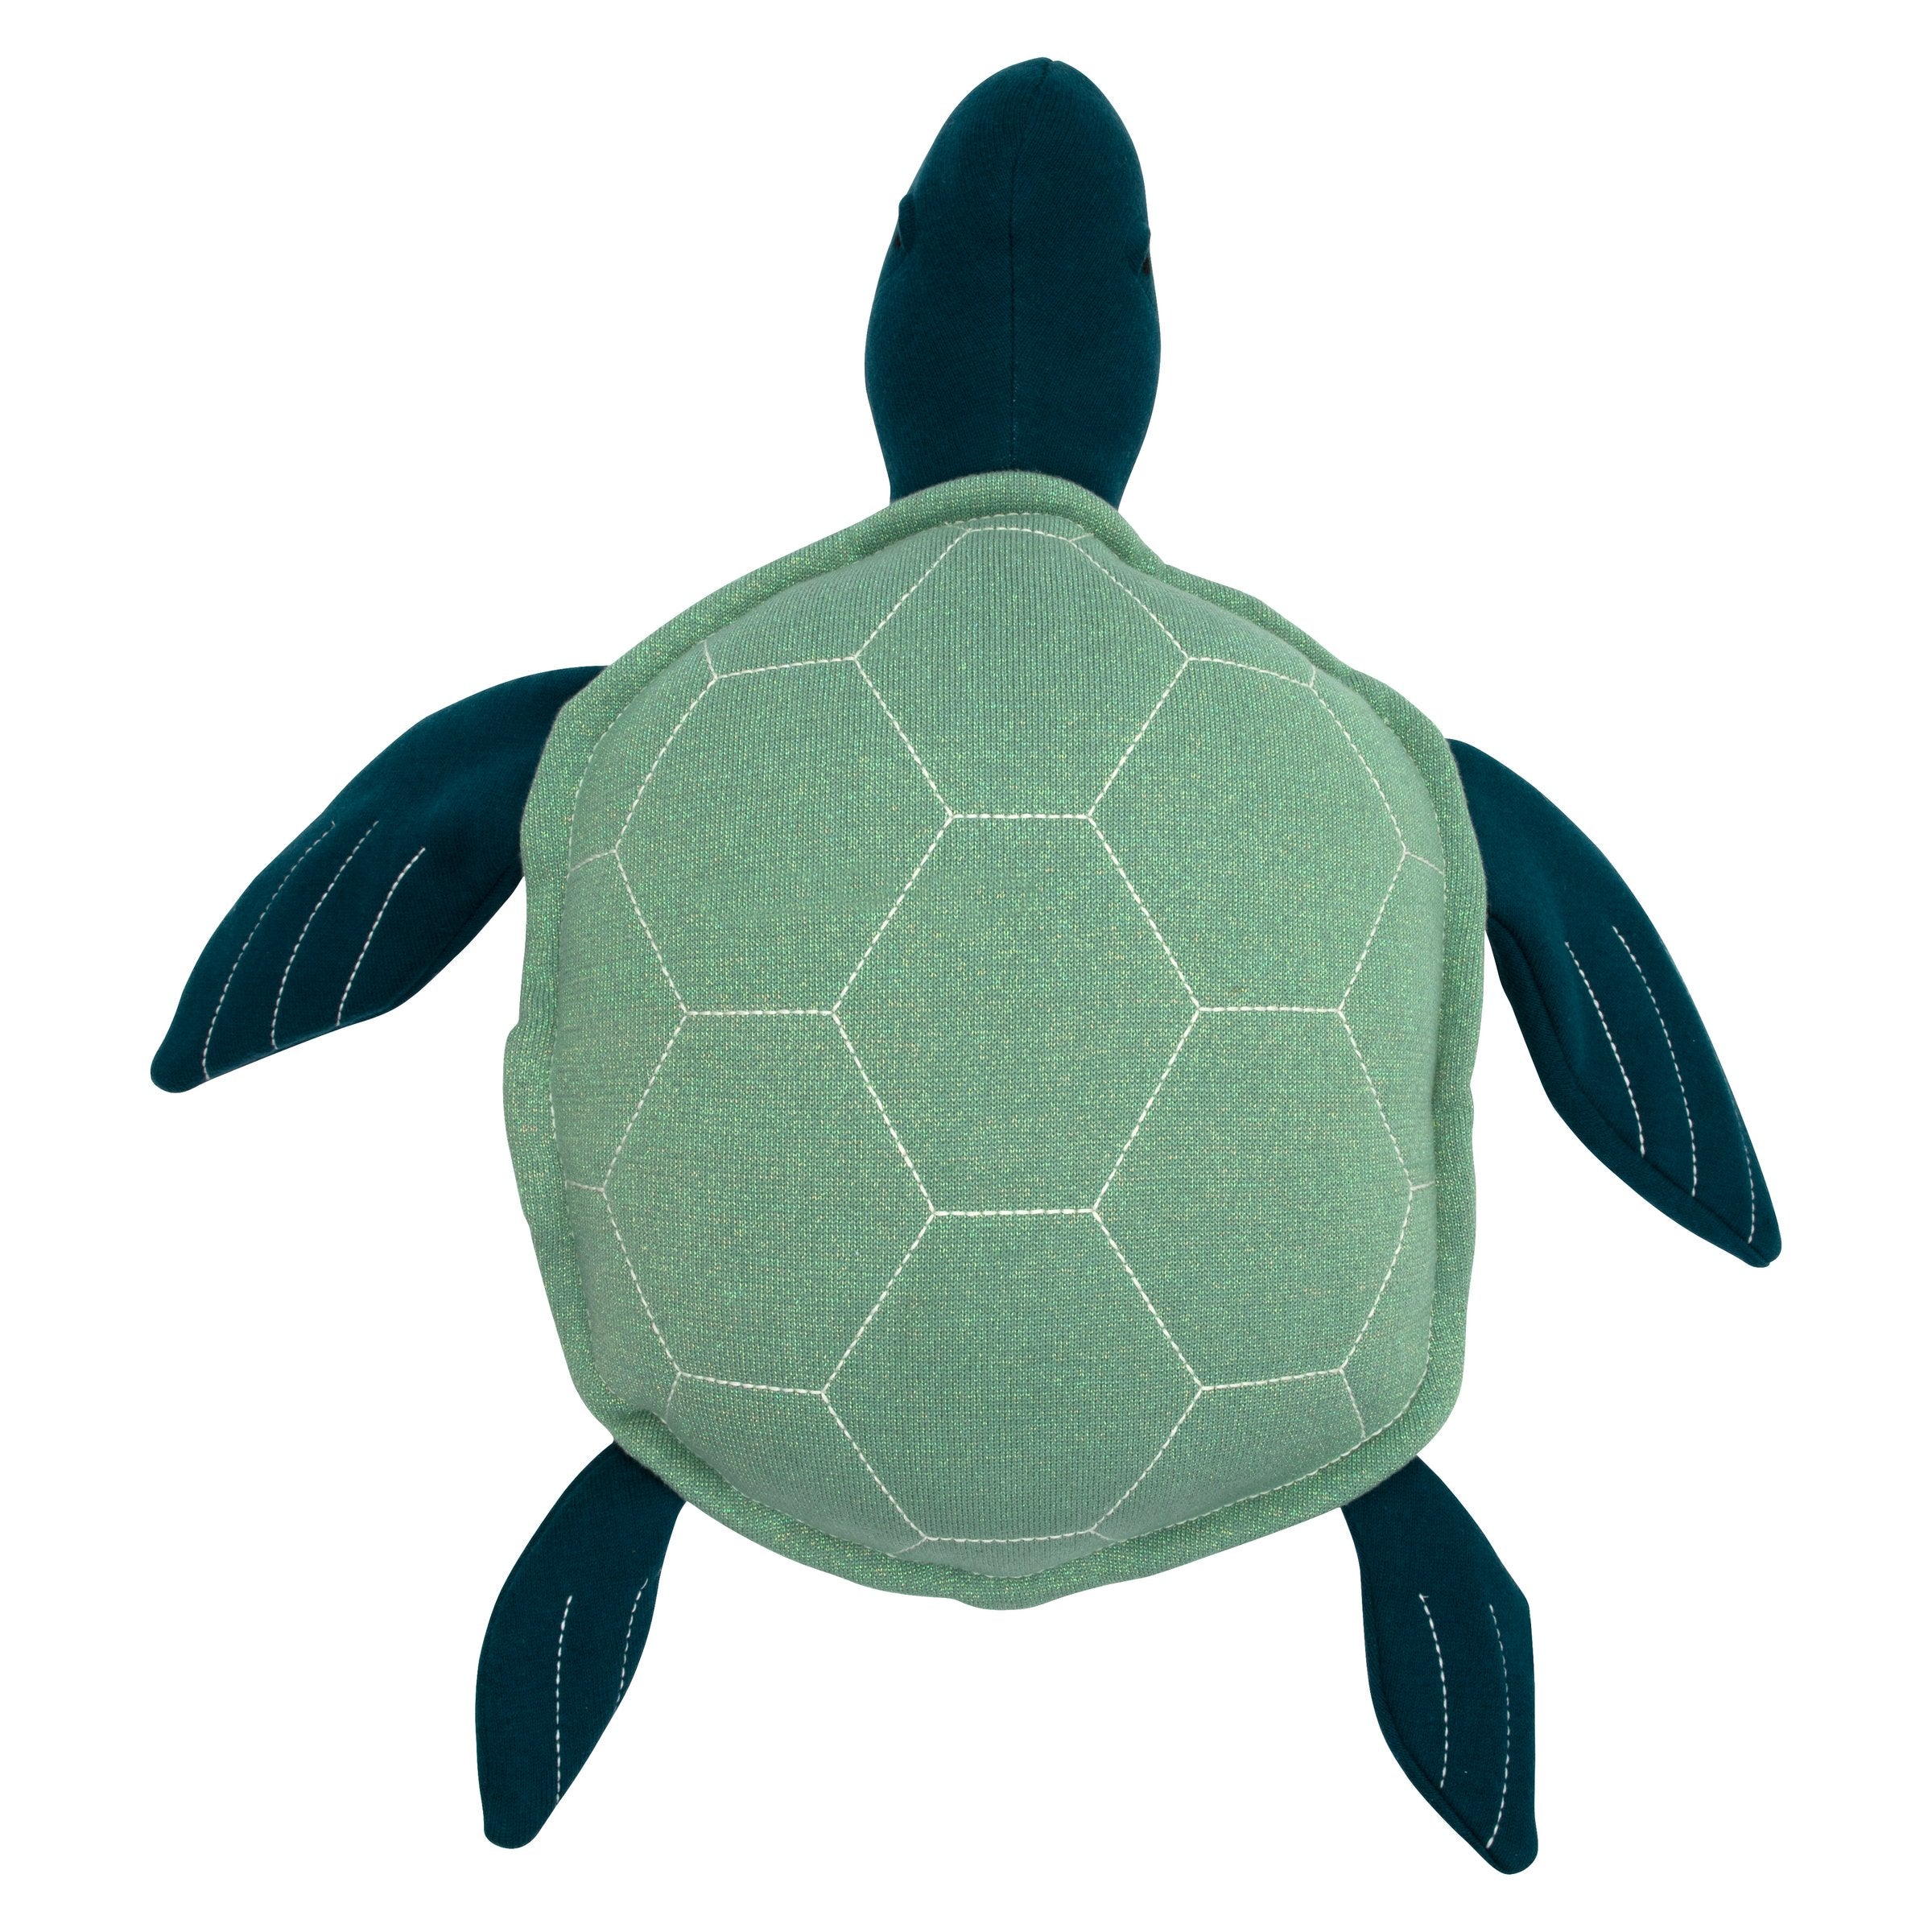 Our turtle toy is crafted from organic cotton. perfect as a baby shower gift idea.